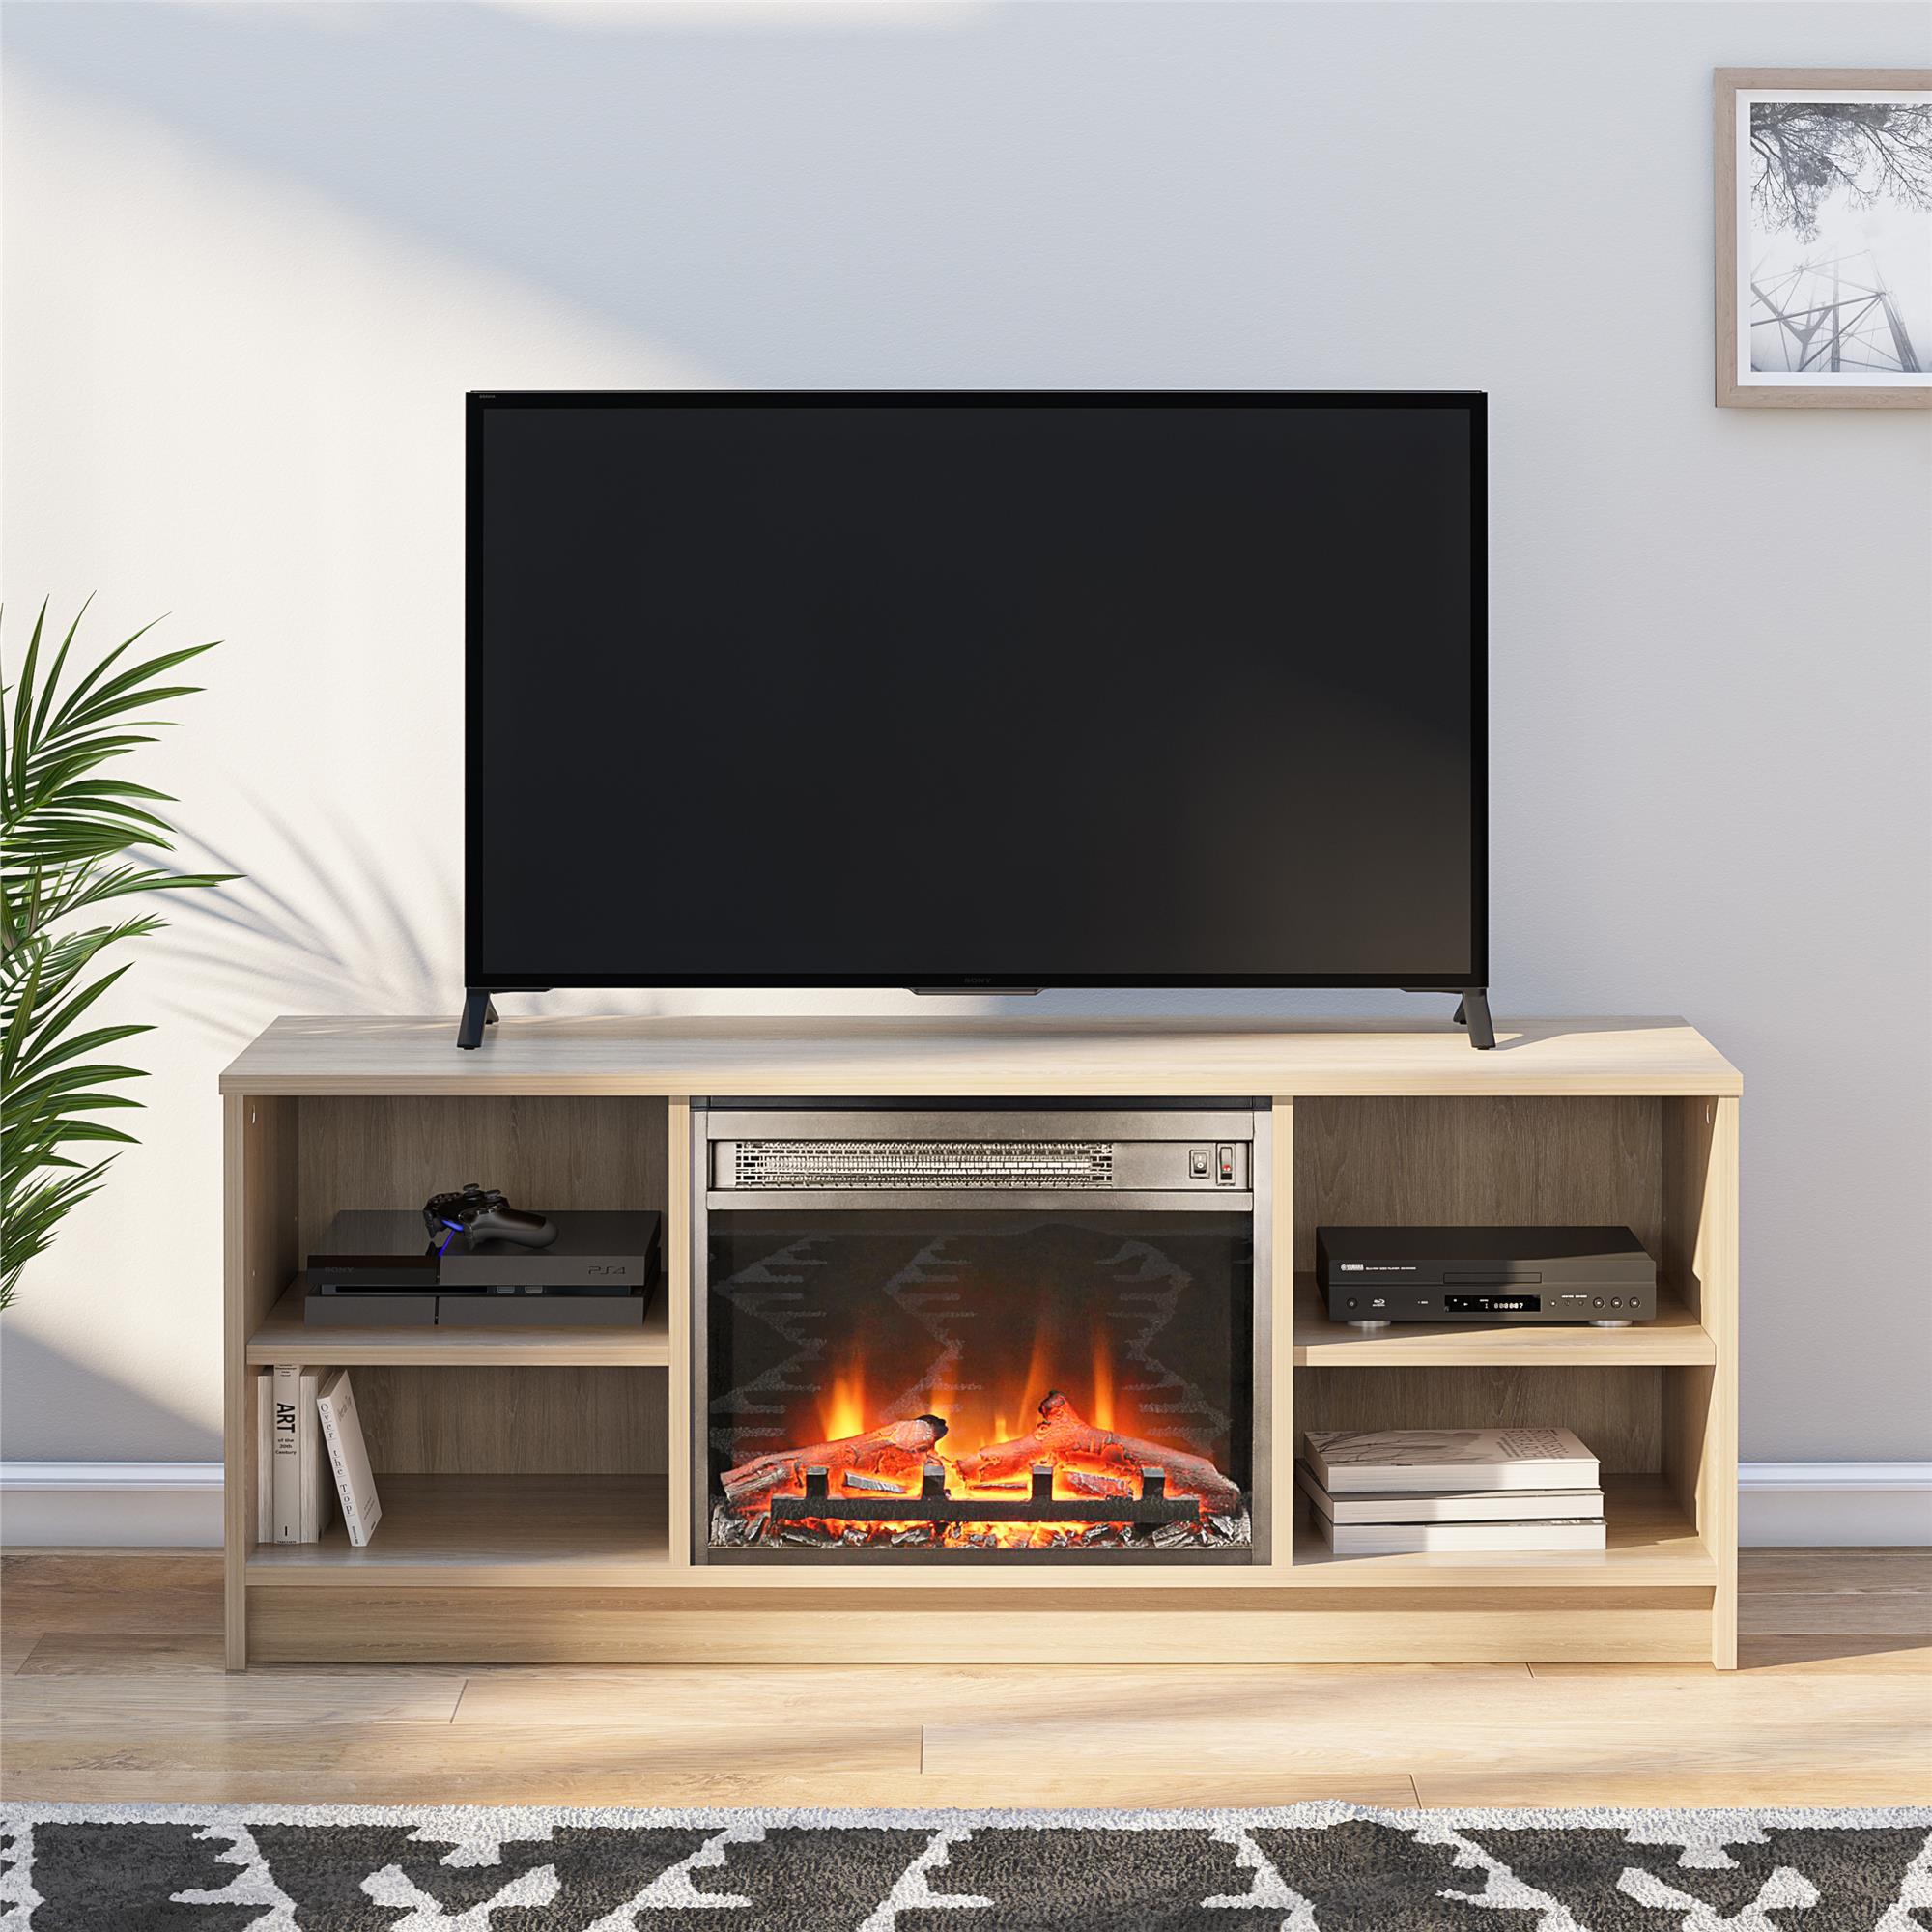 Mainstays Fireplace TV Stand, for TVs up to 55", Natural - image 2 of 12